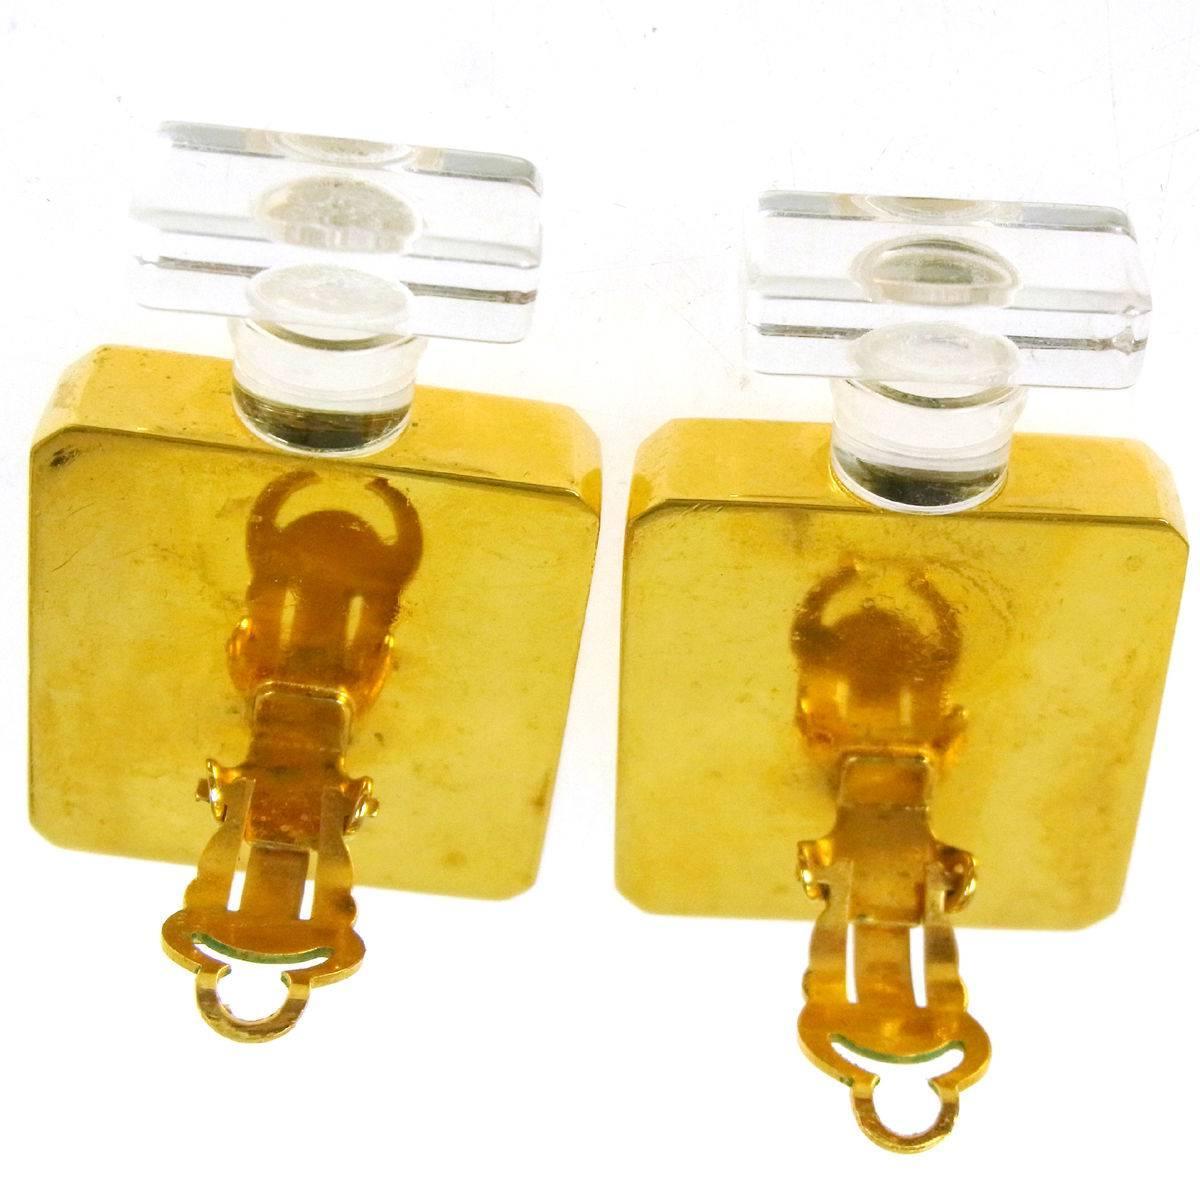 Chanel Rare Vintage Gold Chanel No 5 Bottle Evening Earrings  
Metal
Gold tone
Clip on closure 
Width 1